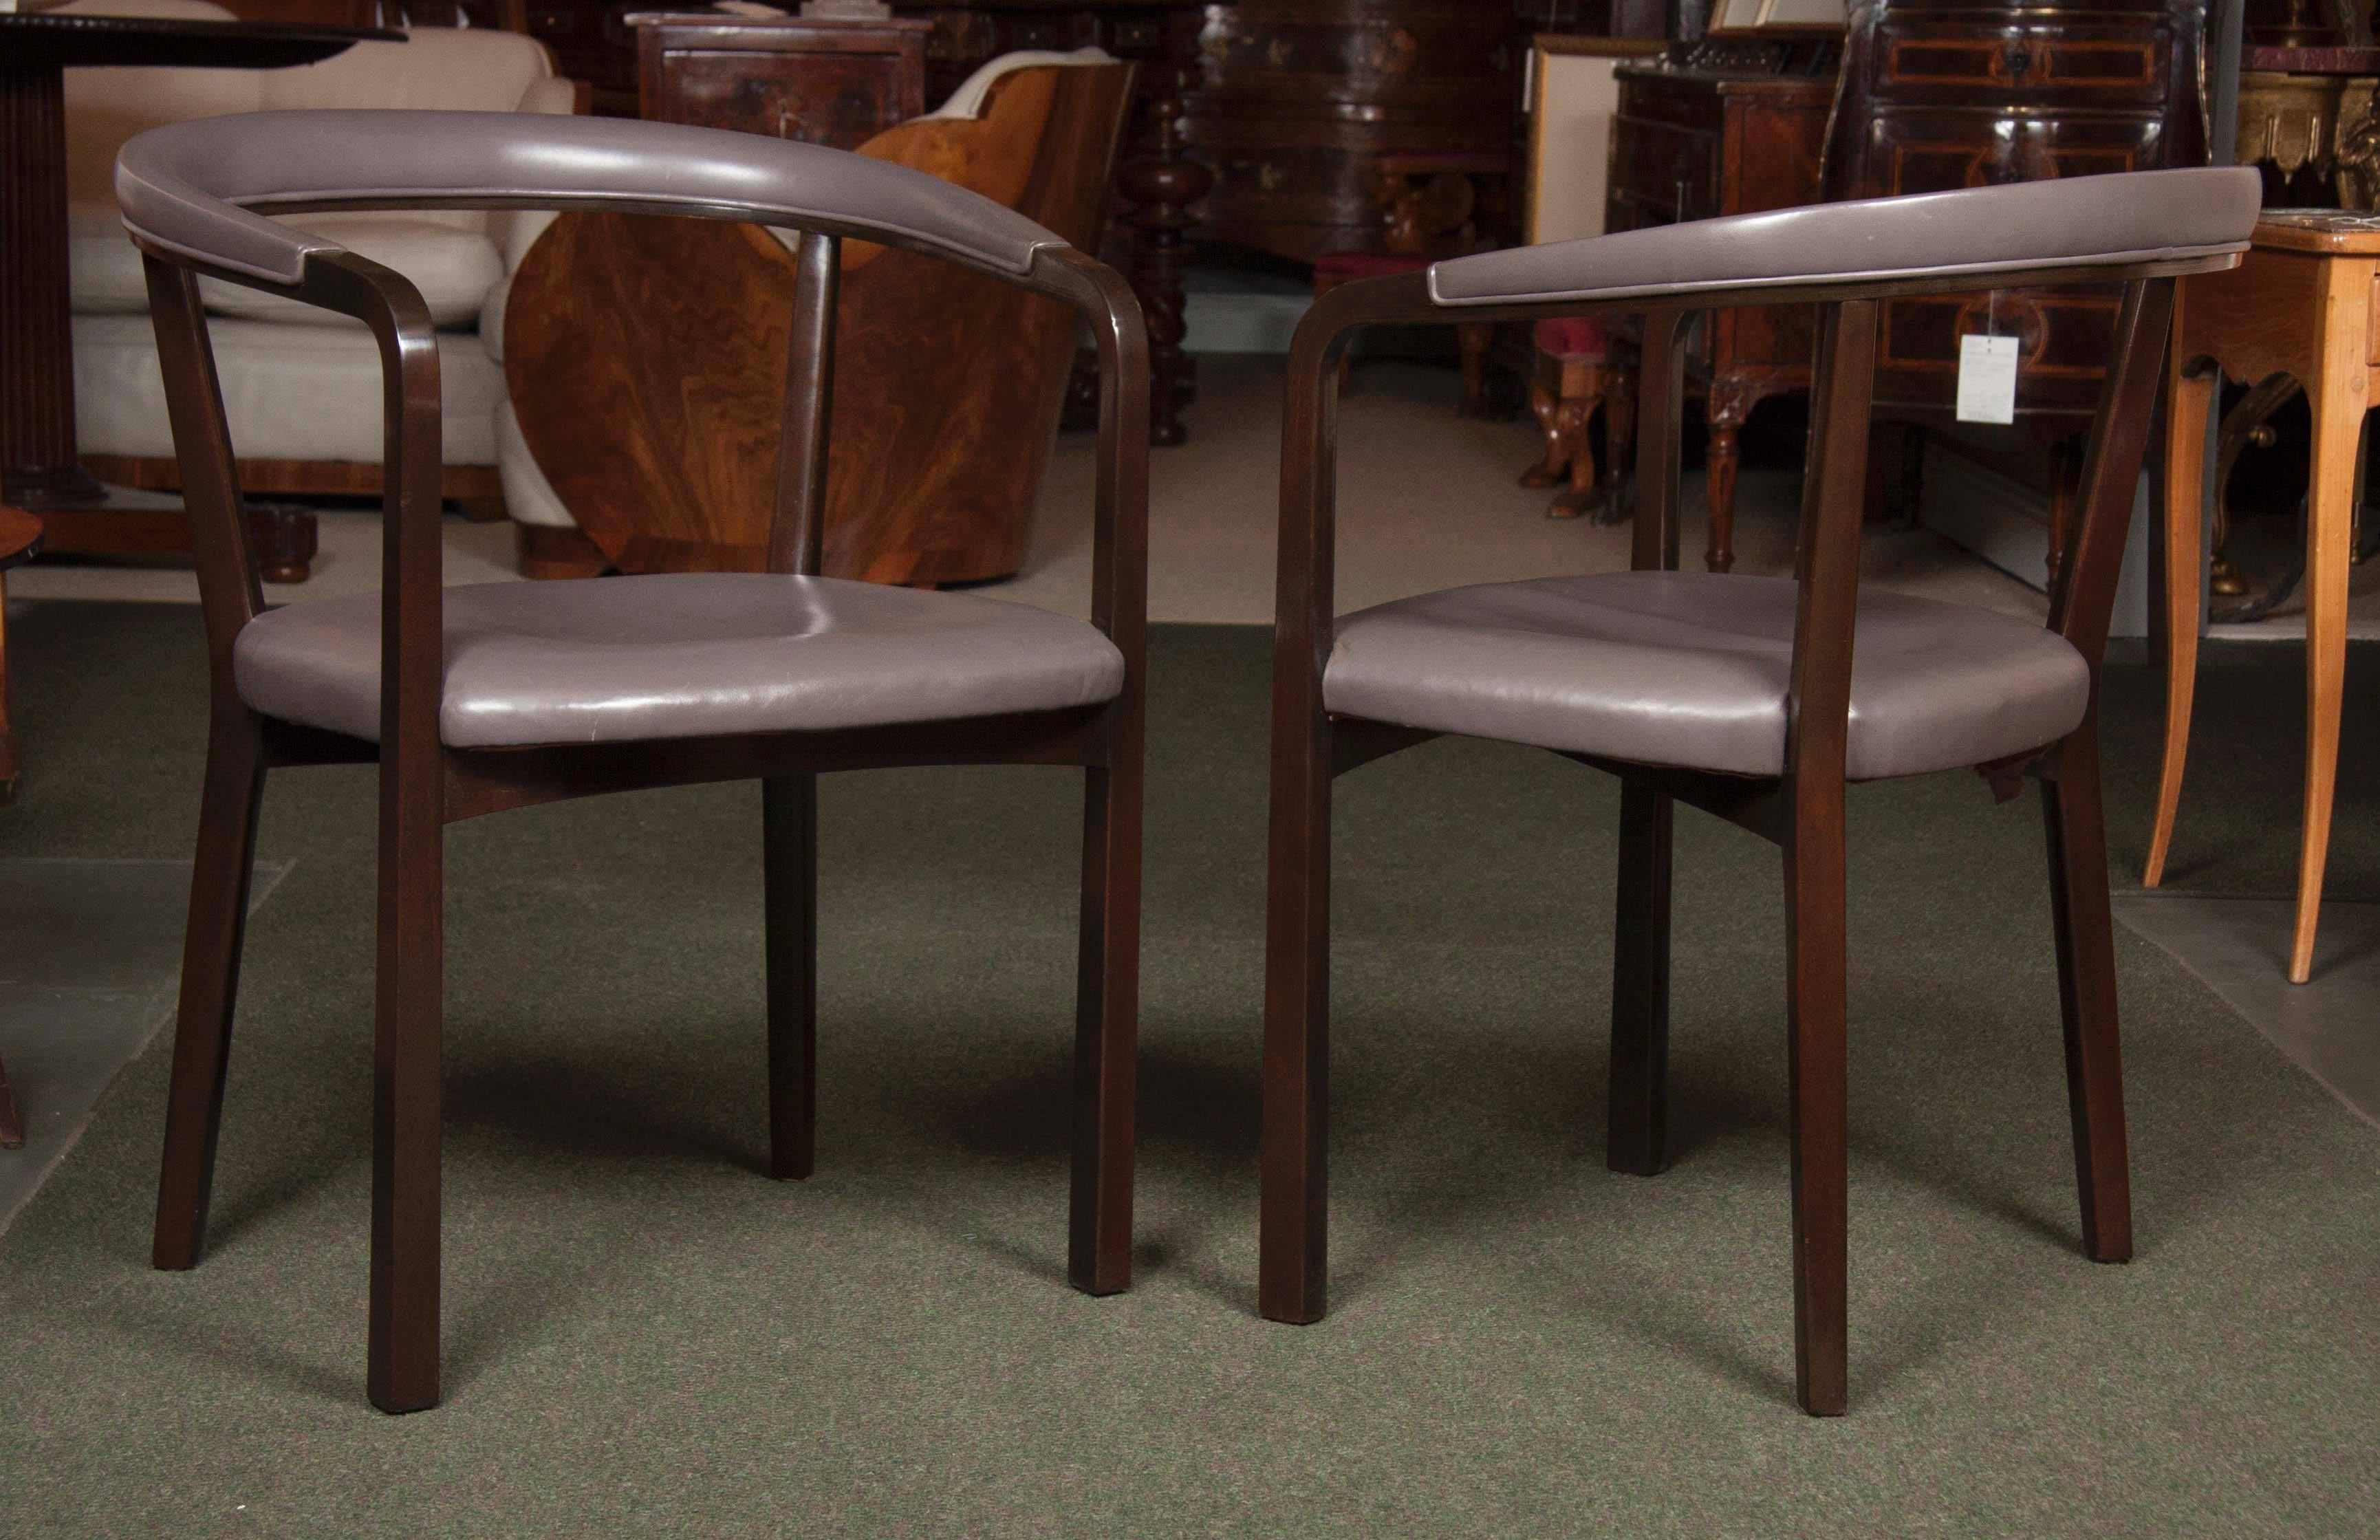 Sculptural pair of Edward Wormley chairs for Dunbar. Walnut frames have been newly refinished in deep chocolate and vintage grey leather is in excellent condition. Great shape and comfort. Both chairs have their metal Dunbar plates intact.